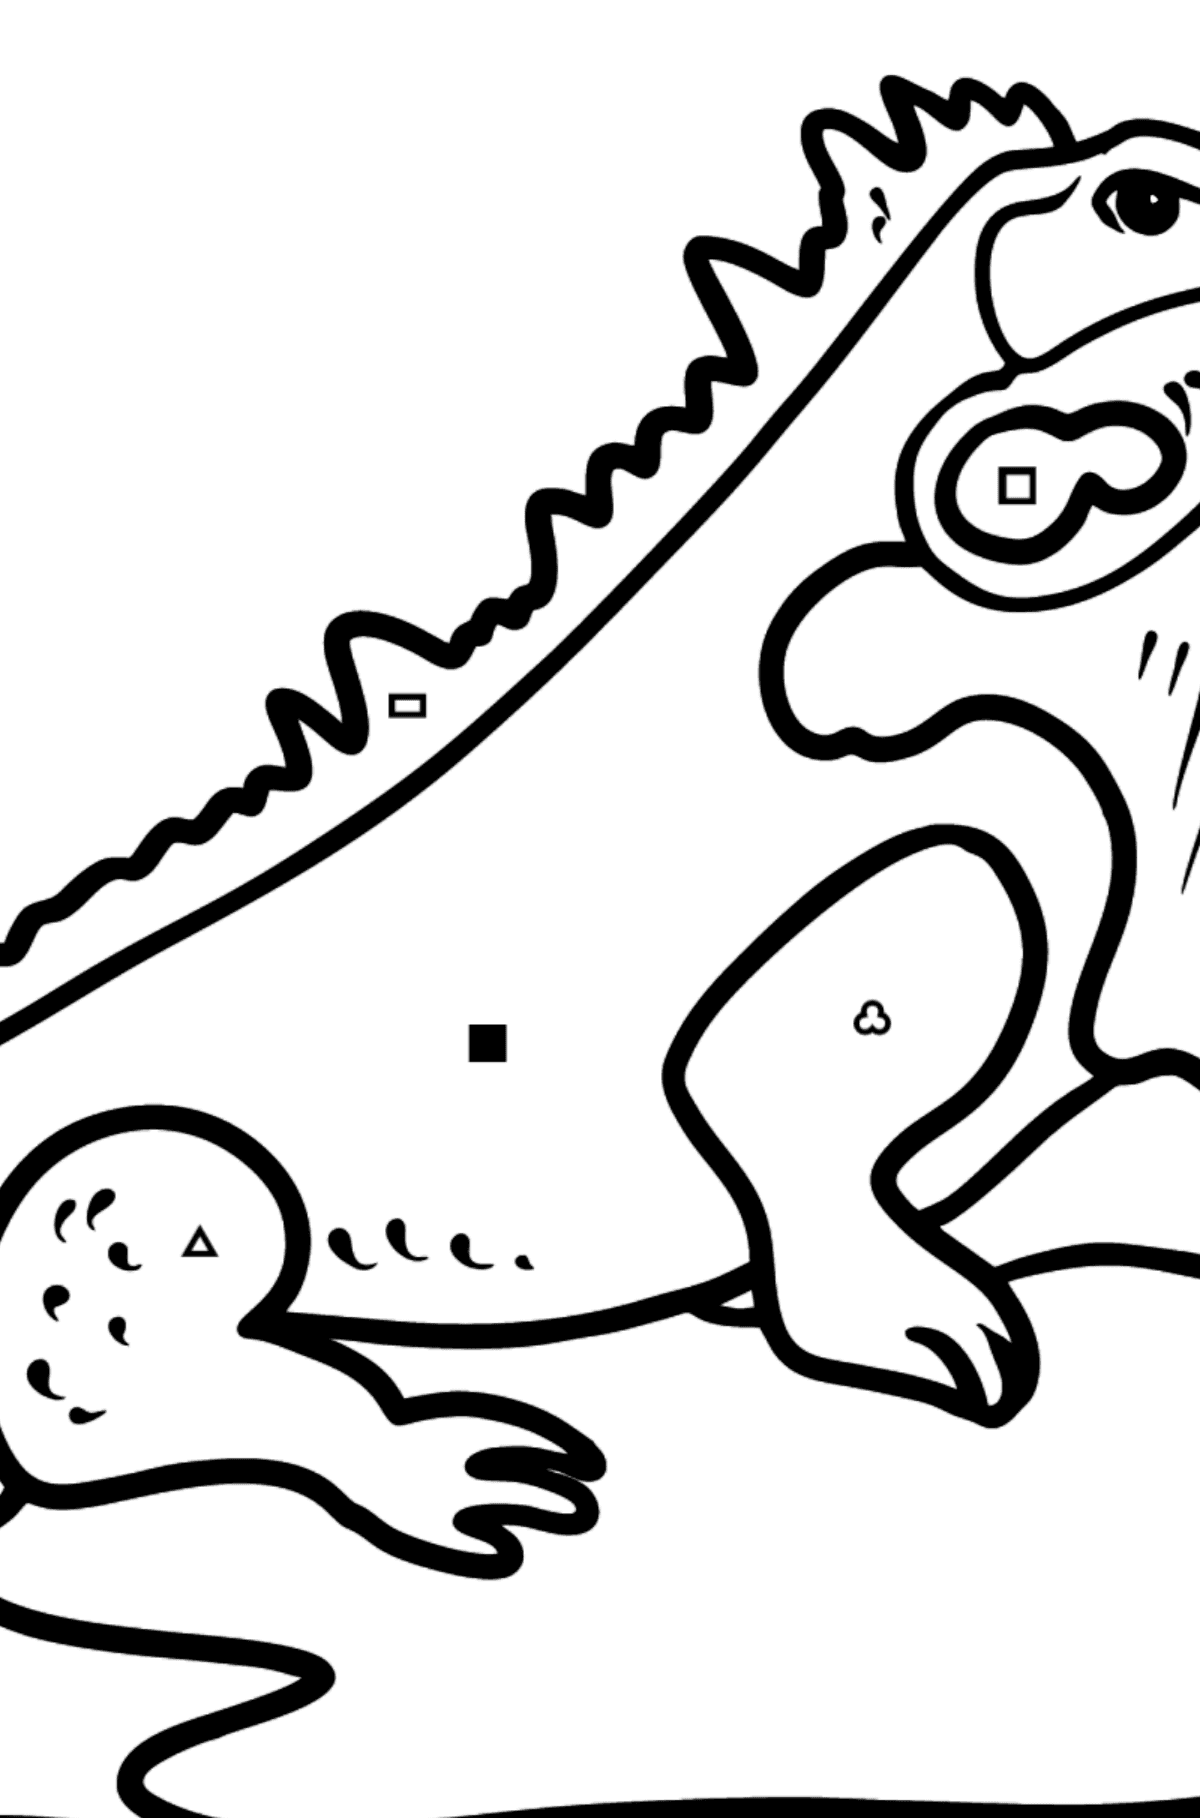 Portuguese Letter I coloring pages - IGUANA - Coloring by Symbols and Geometric Shapes for Kids